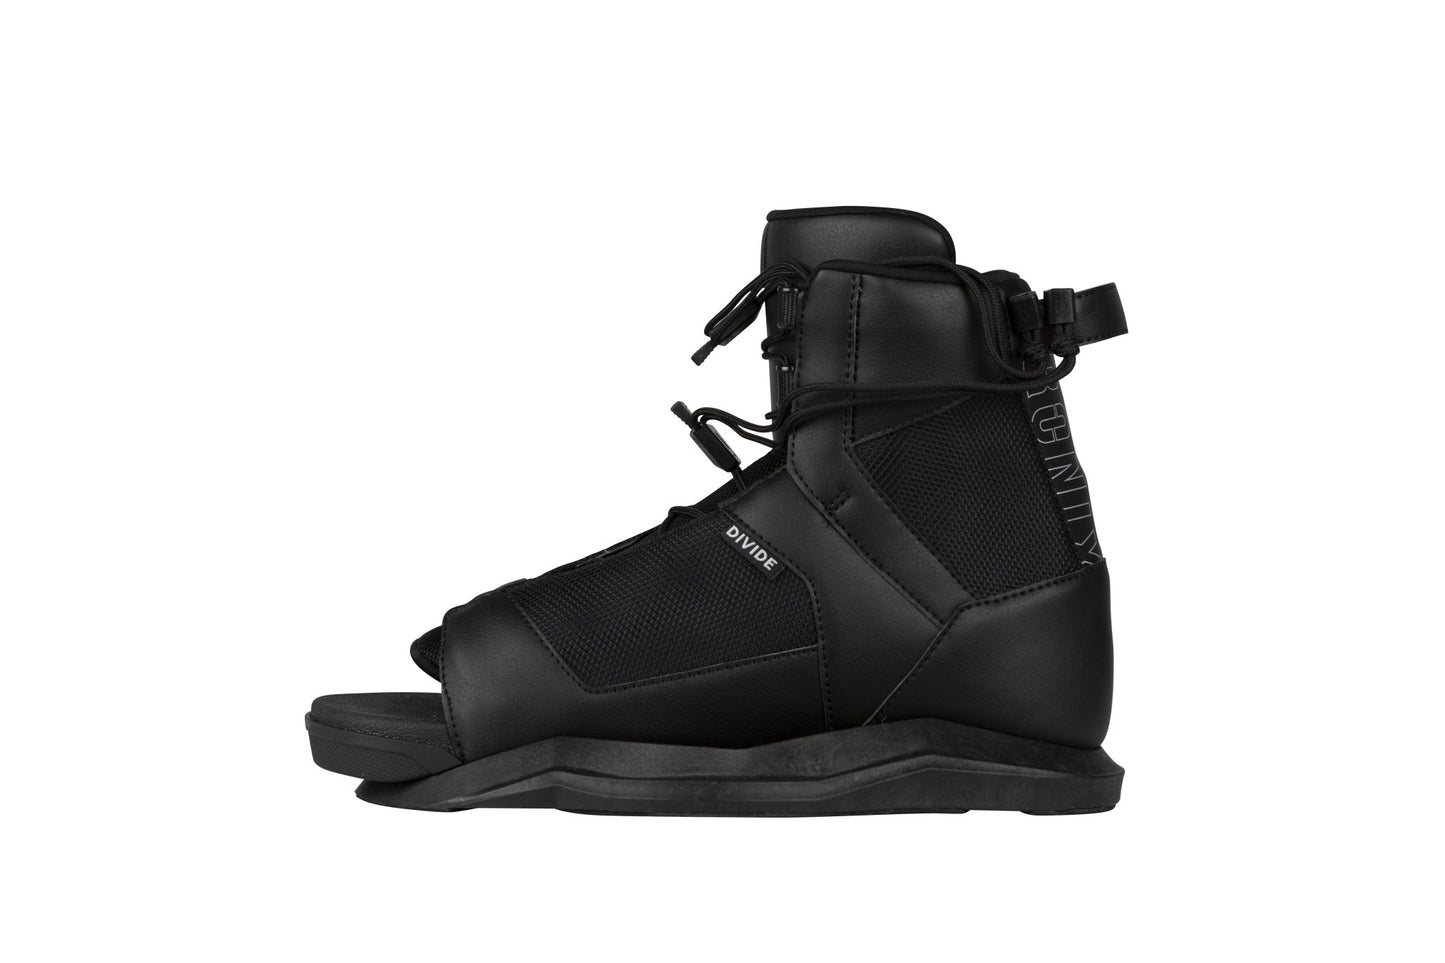 2023 Ronix Divide Boot -Ronix233120-Black-10.5to14.5